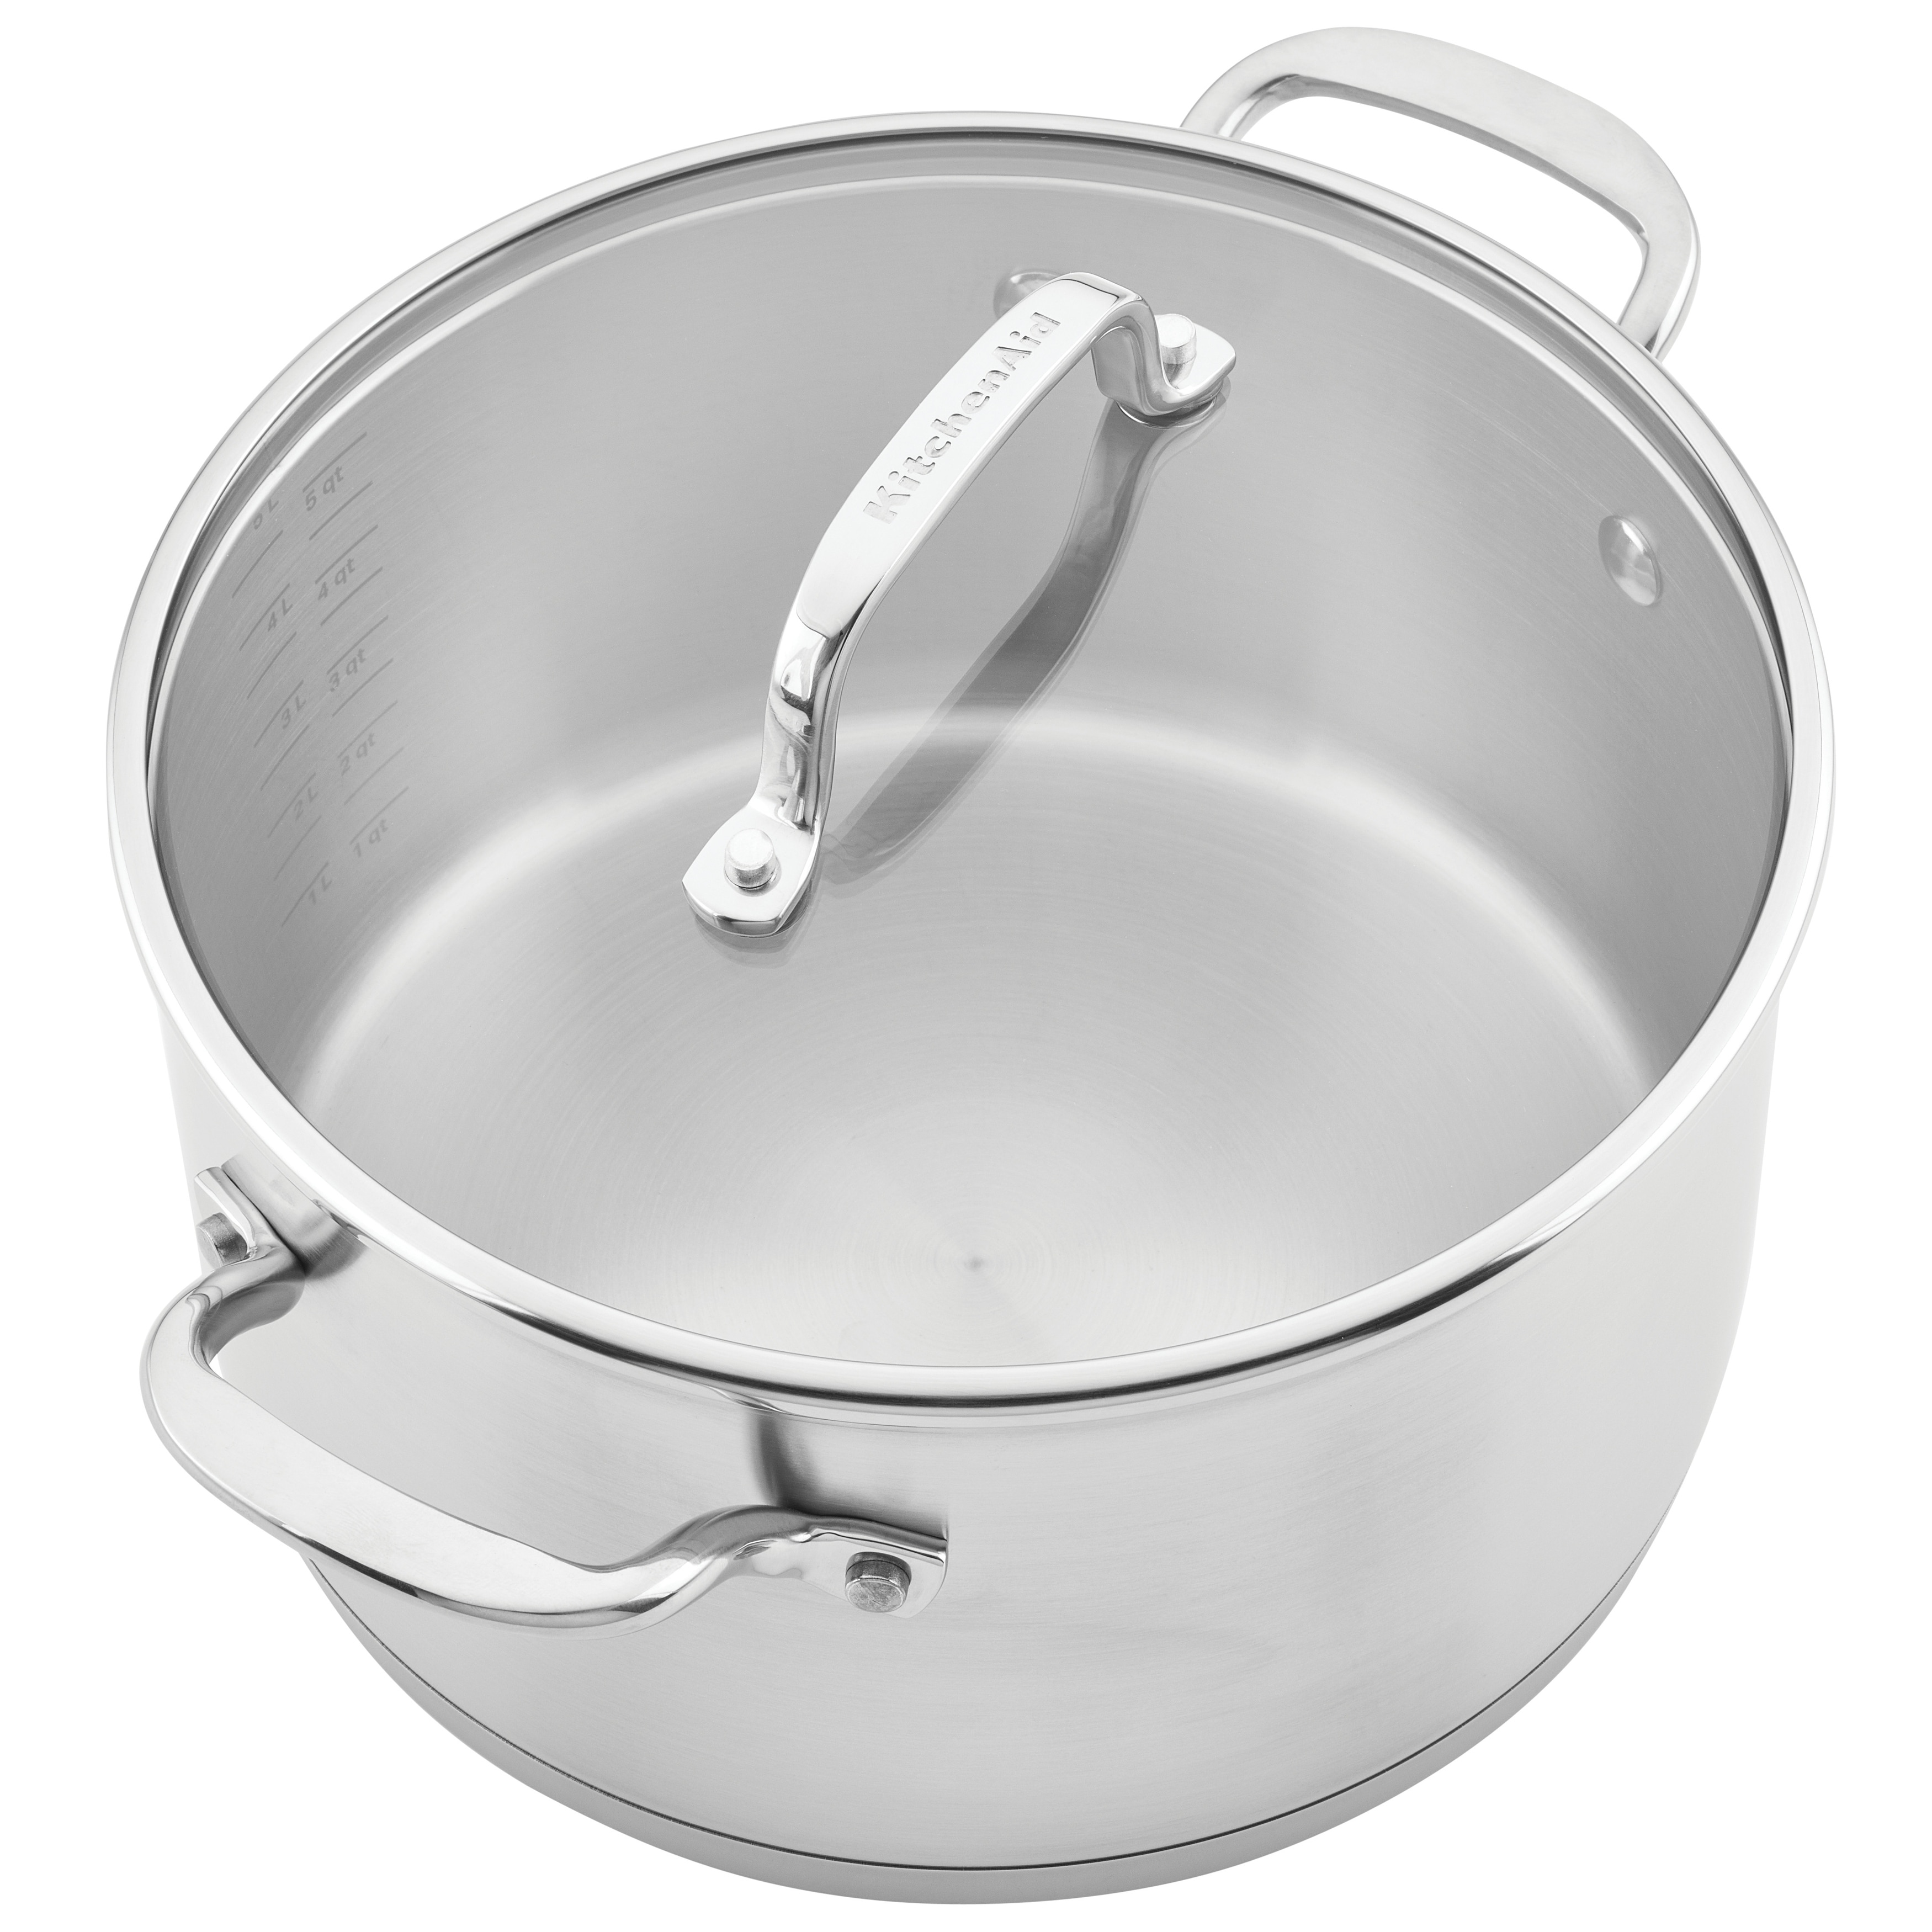 https://ak1.ostkcdn.com/images/products/is/images/direct/bc81663ec9a8f9201e81a7b3bc5e63708a461a33/KitchenAid-3-Ply-Base-Stainless-Steel-Cookware-Induction-Pots-and-Pans-Set%2C-10-Piece%2C-Brushed-Stainless-Steel.jpg